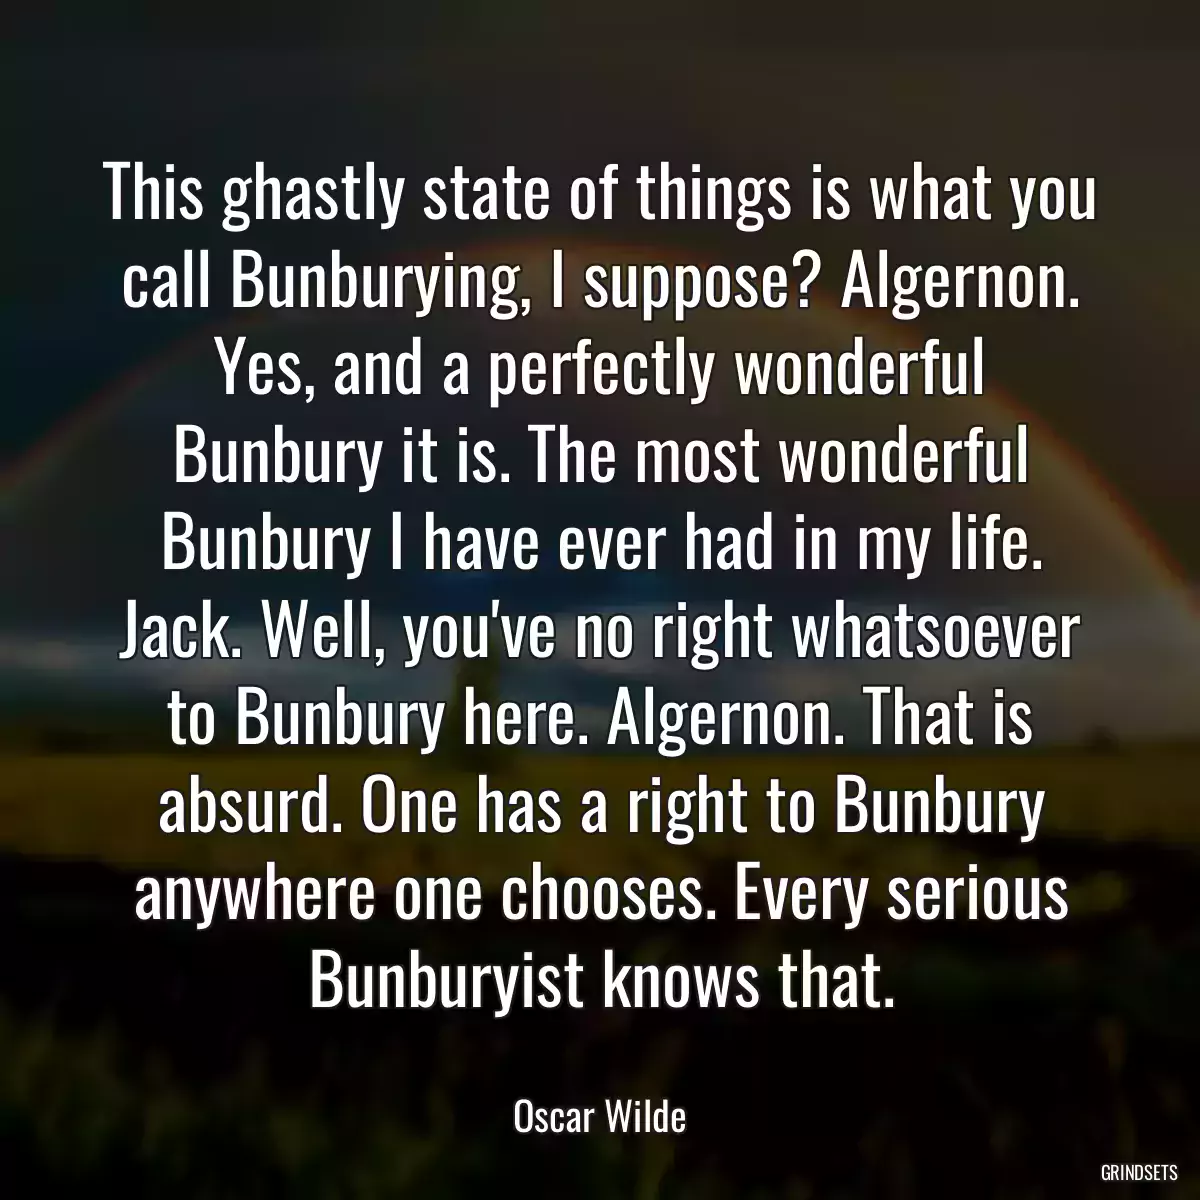 This ghastly state of things is what you call Bunburying, I suppose? Algernon. Yes, and a perfectly wonderful Bunbury it is. The most wonderful Bunbury I have ever had in my life. Jack. Well, you\'ve no right whatsoever to Bunbury here. Algernon. That is absurd. One has a right to Bunbury anywhere one chooses. Every serious Bunburyist knows that.